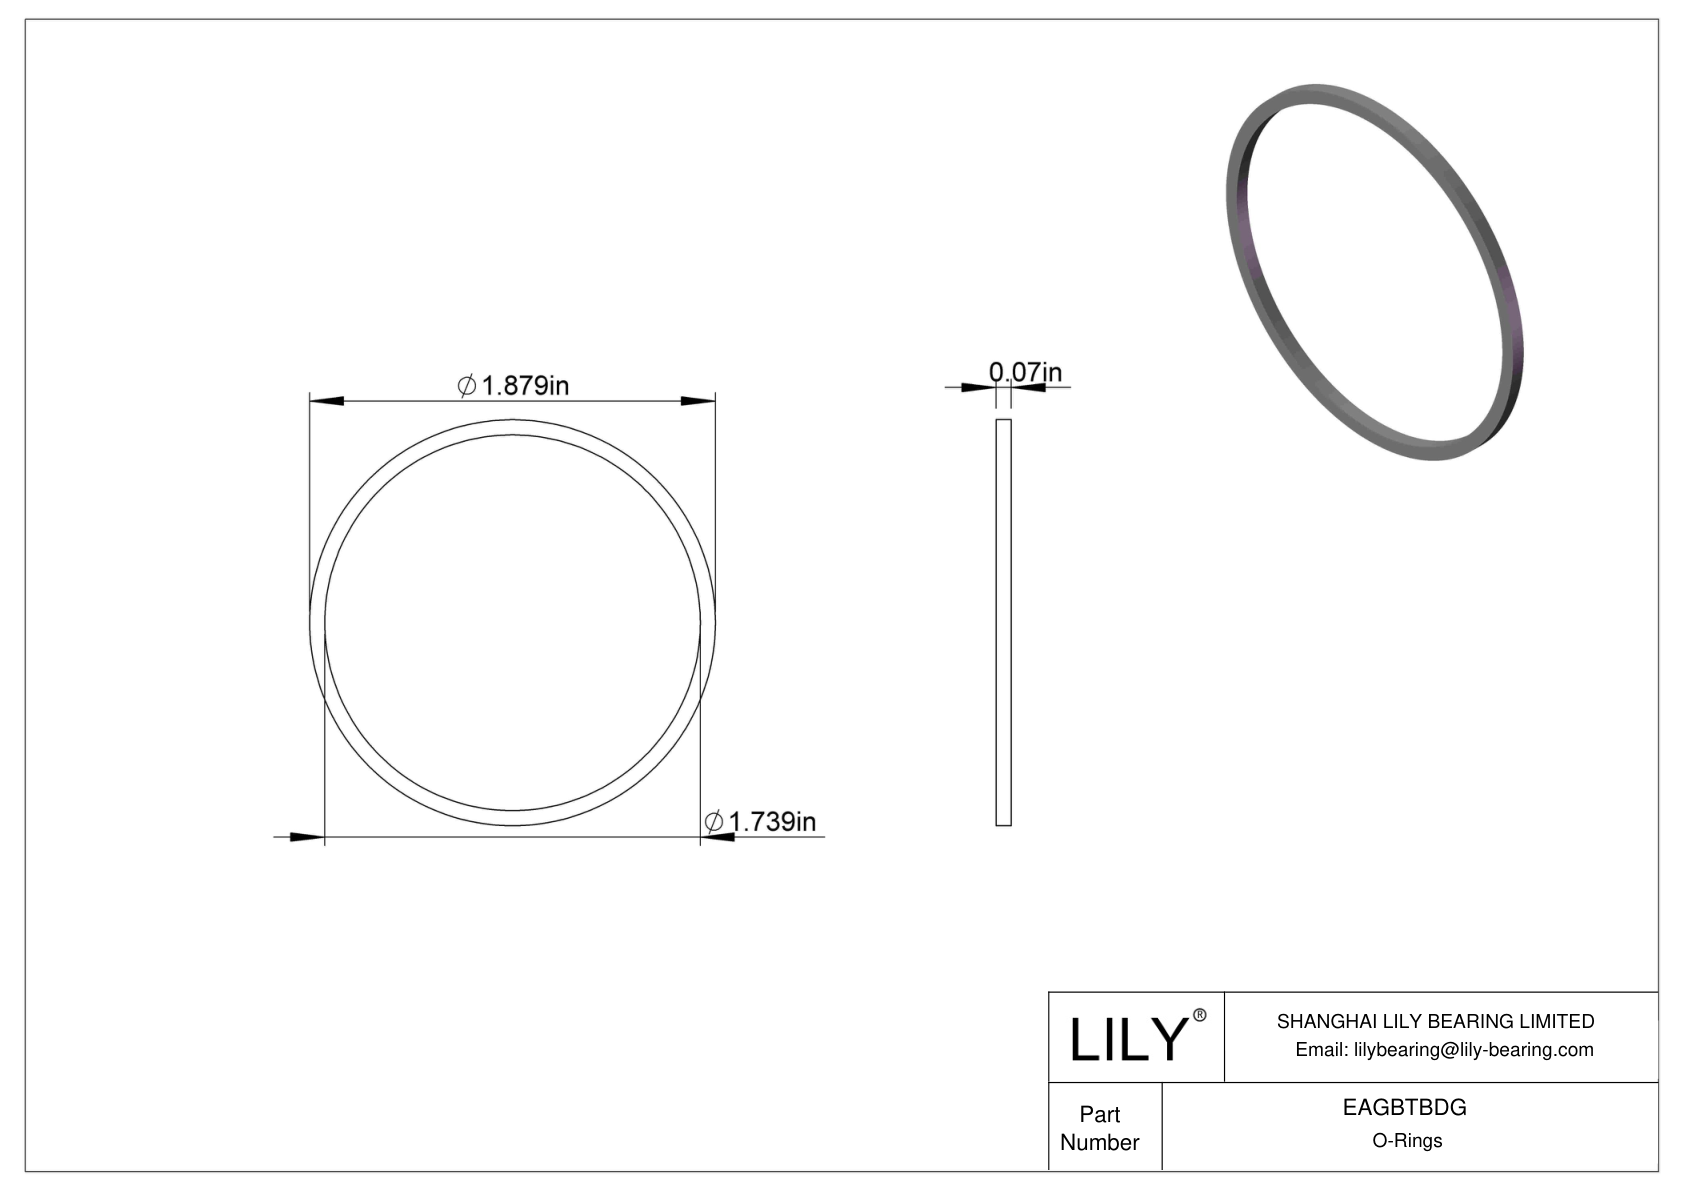 EAGBTBDG Oil Resistant O-Rings Square cad drawing